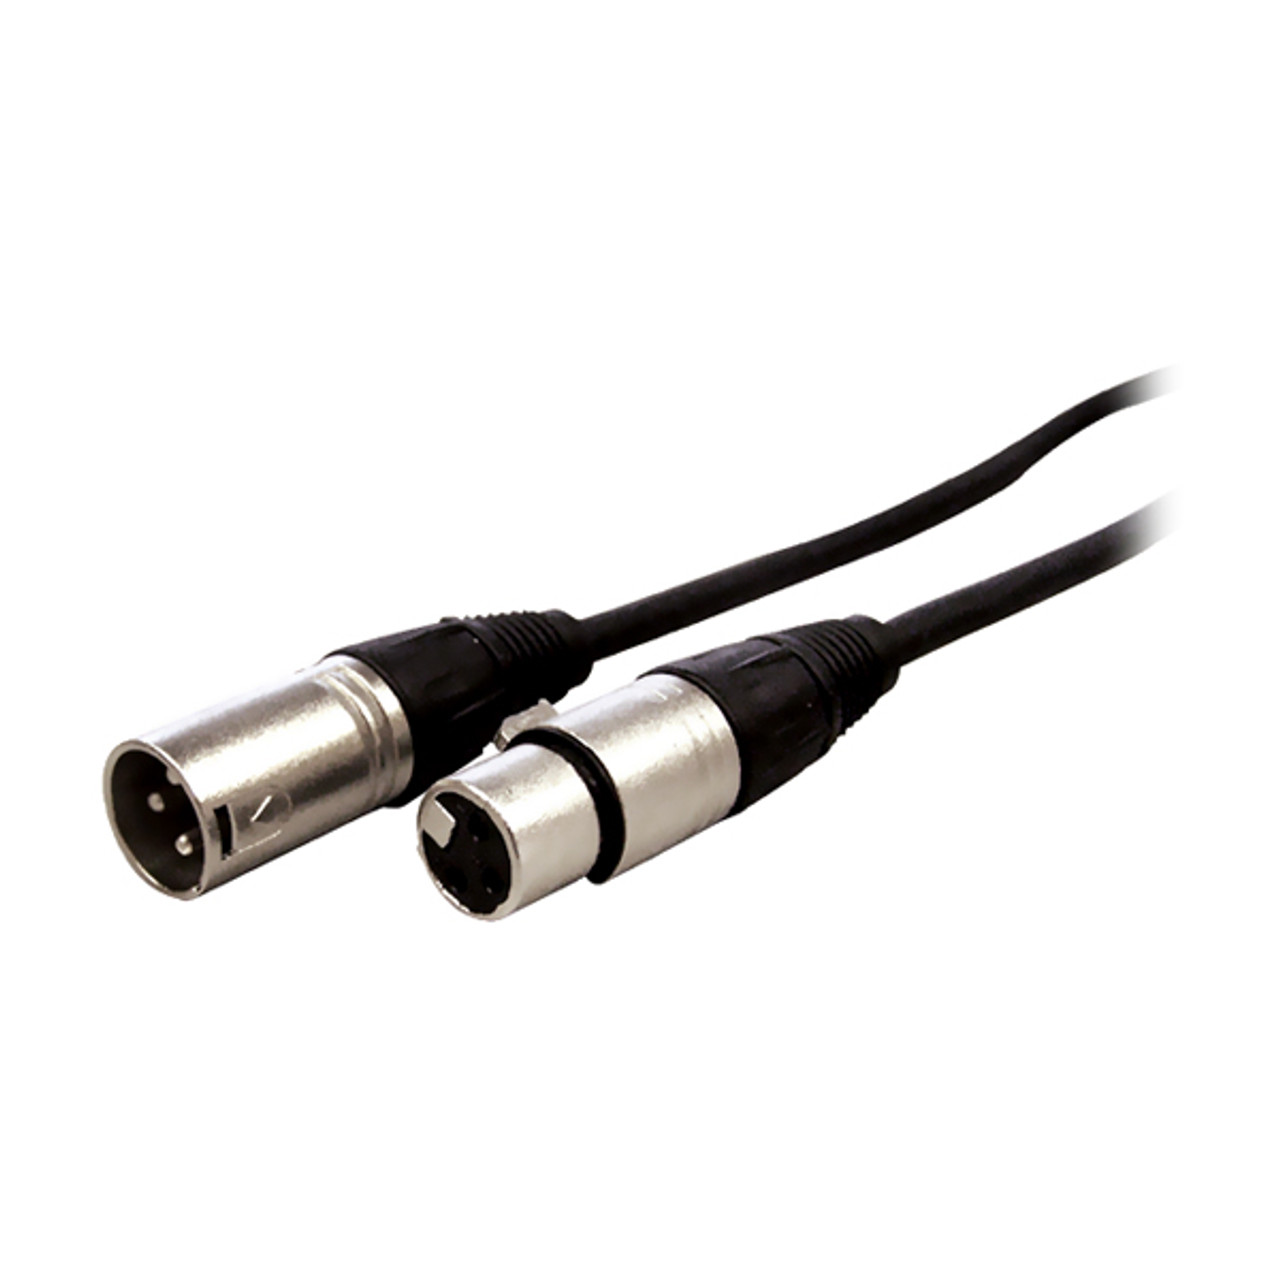  Plugger 10m Black XLR 3-Pin Cable - Male to Female : Musical  Instruments